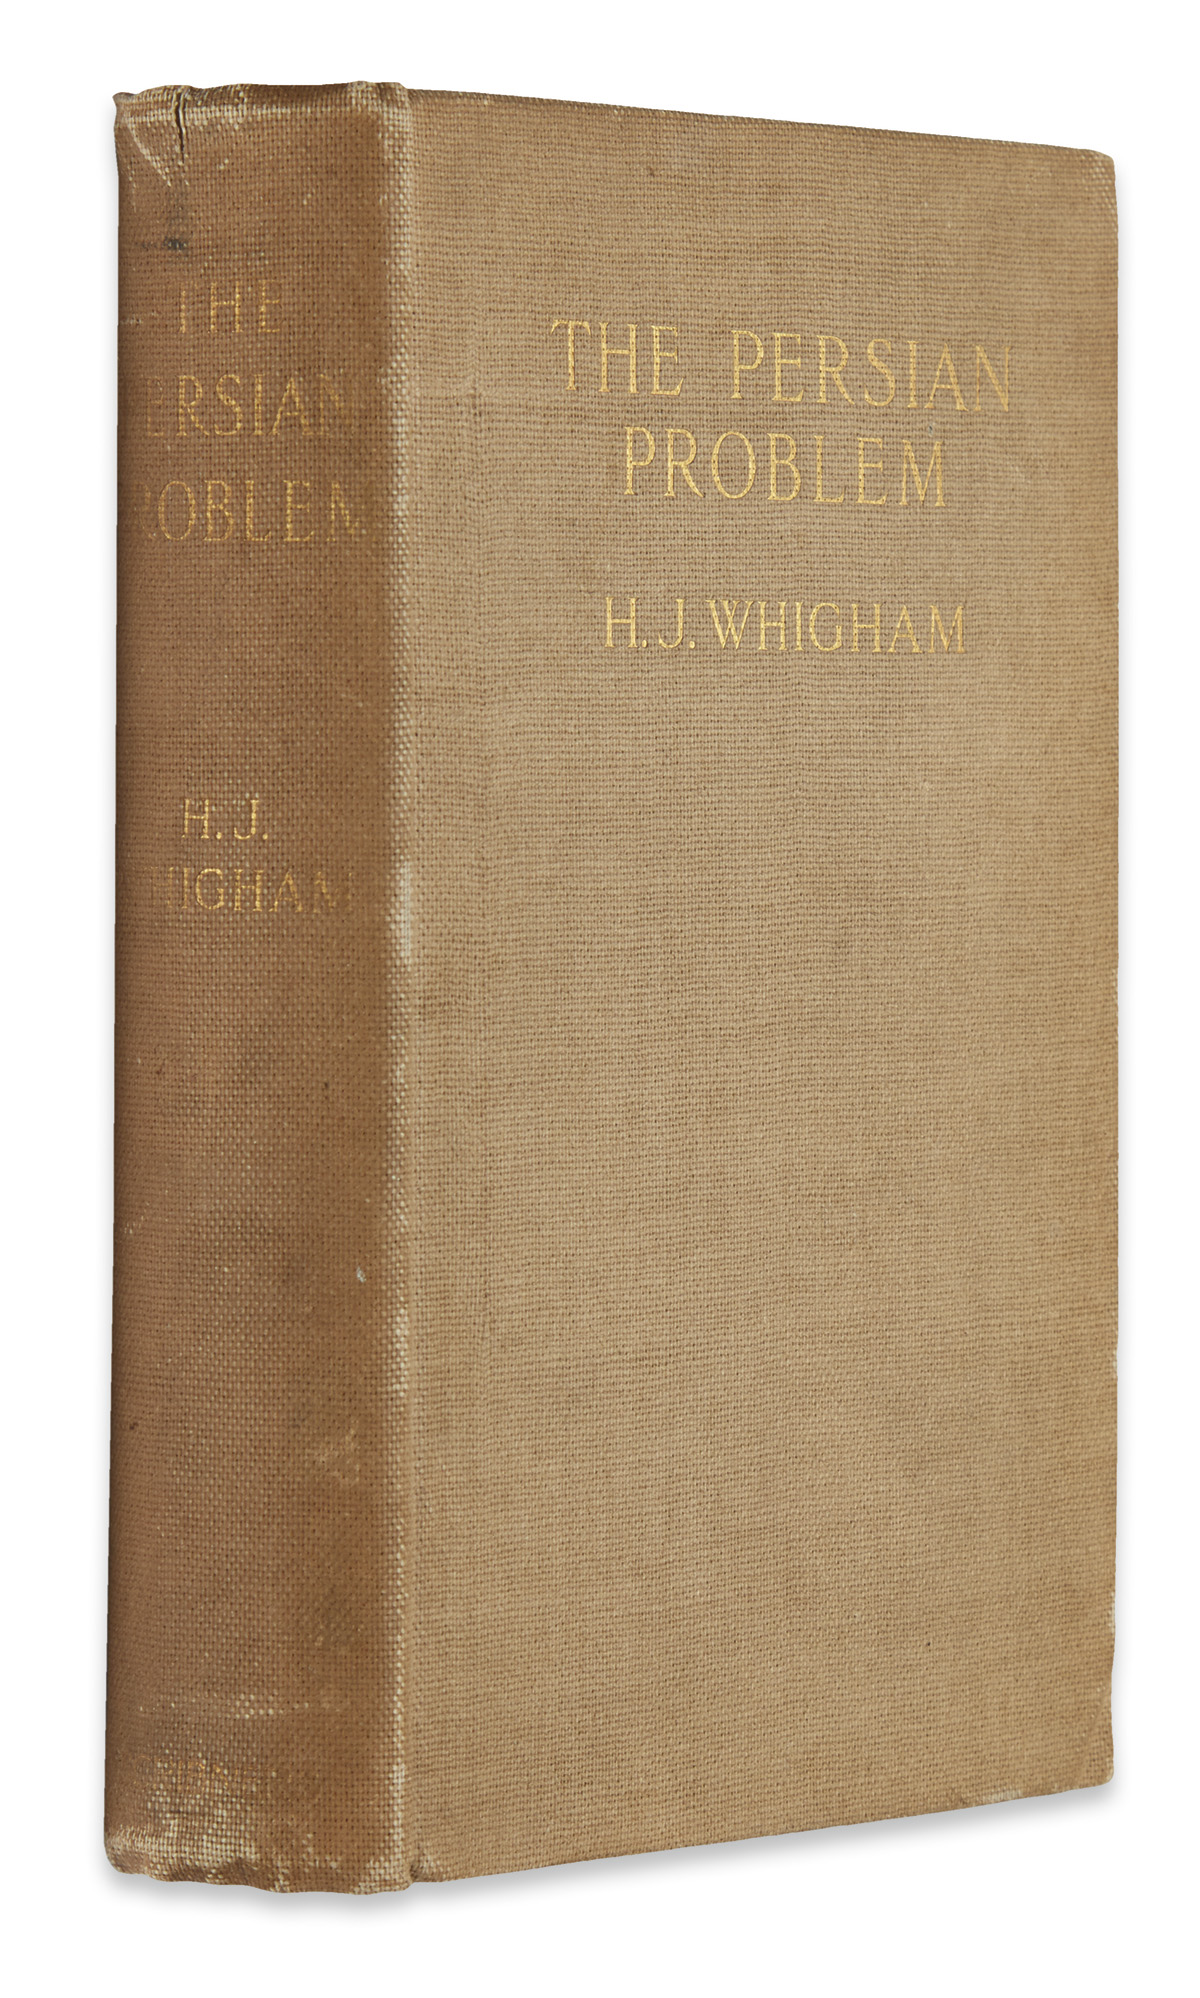 WHIGHAM, HENRY JAMES. The Persian Problem. An Examination of the Rival Positions of Russia and Great Britain in Persia.  1903